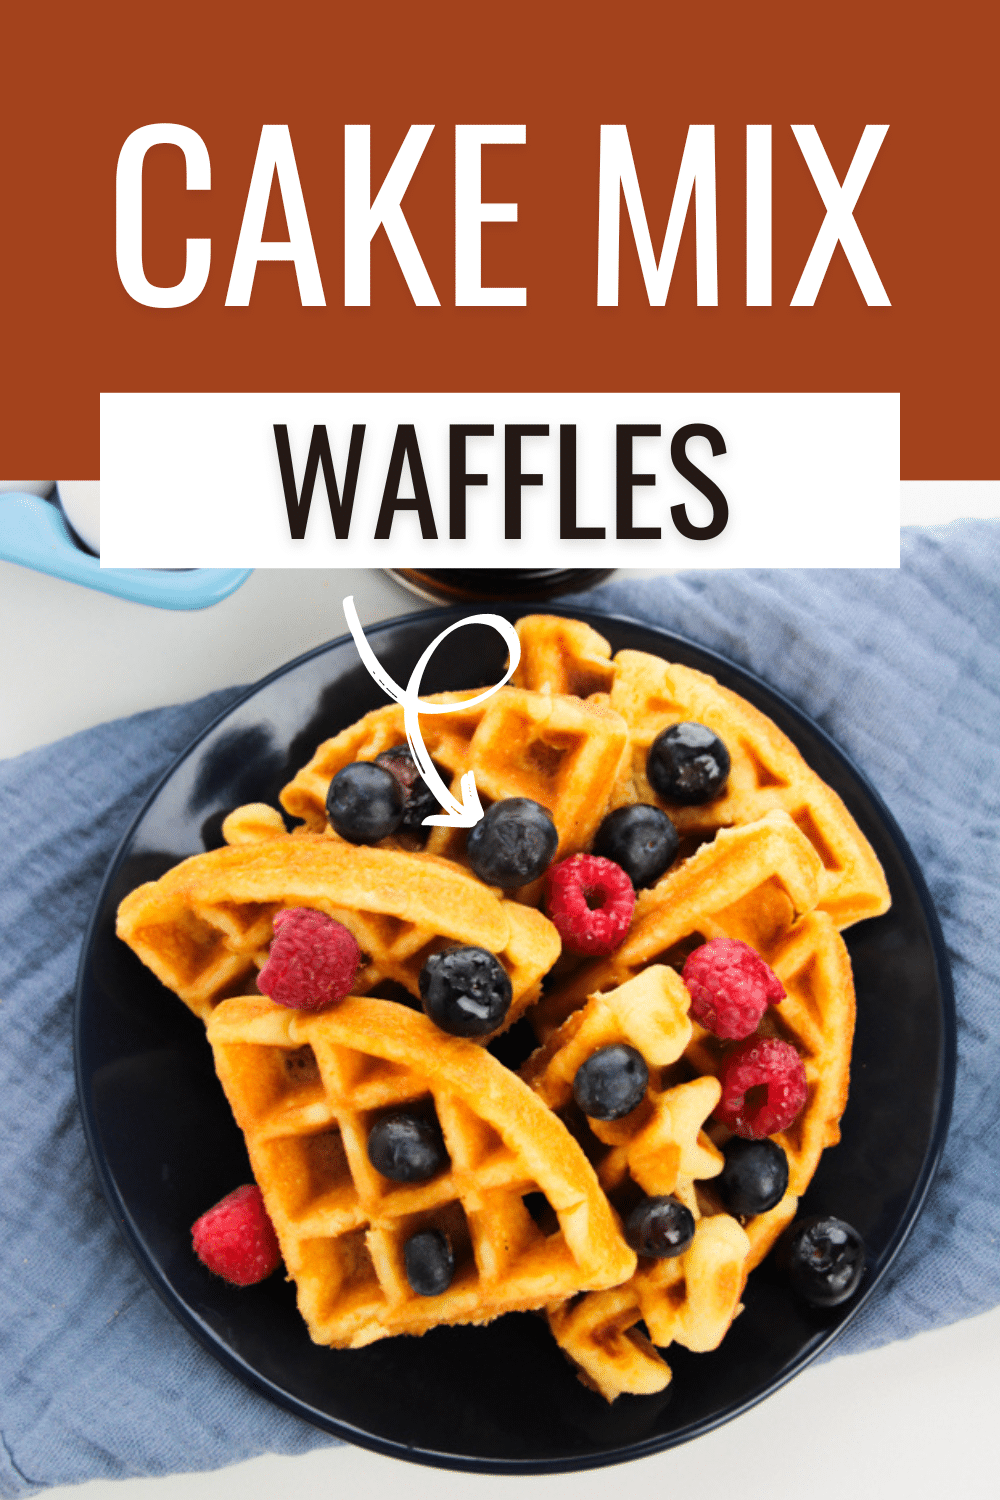 These Cake Mix Waffles are the perfect way to start your morning! They are light. fluffy, flavorful and made with a few simple ingredients. #cakemixwaffles #wafflemakers #cakebatterwaffles #birthdaybreakfast #breakfastrecipe via @wondermomwannab